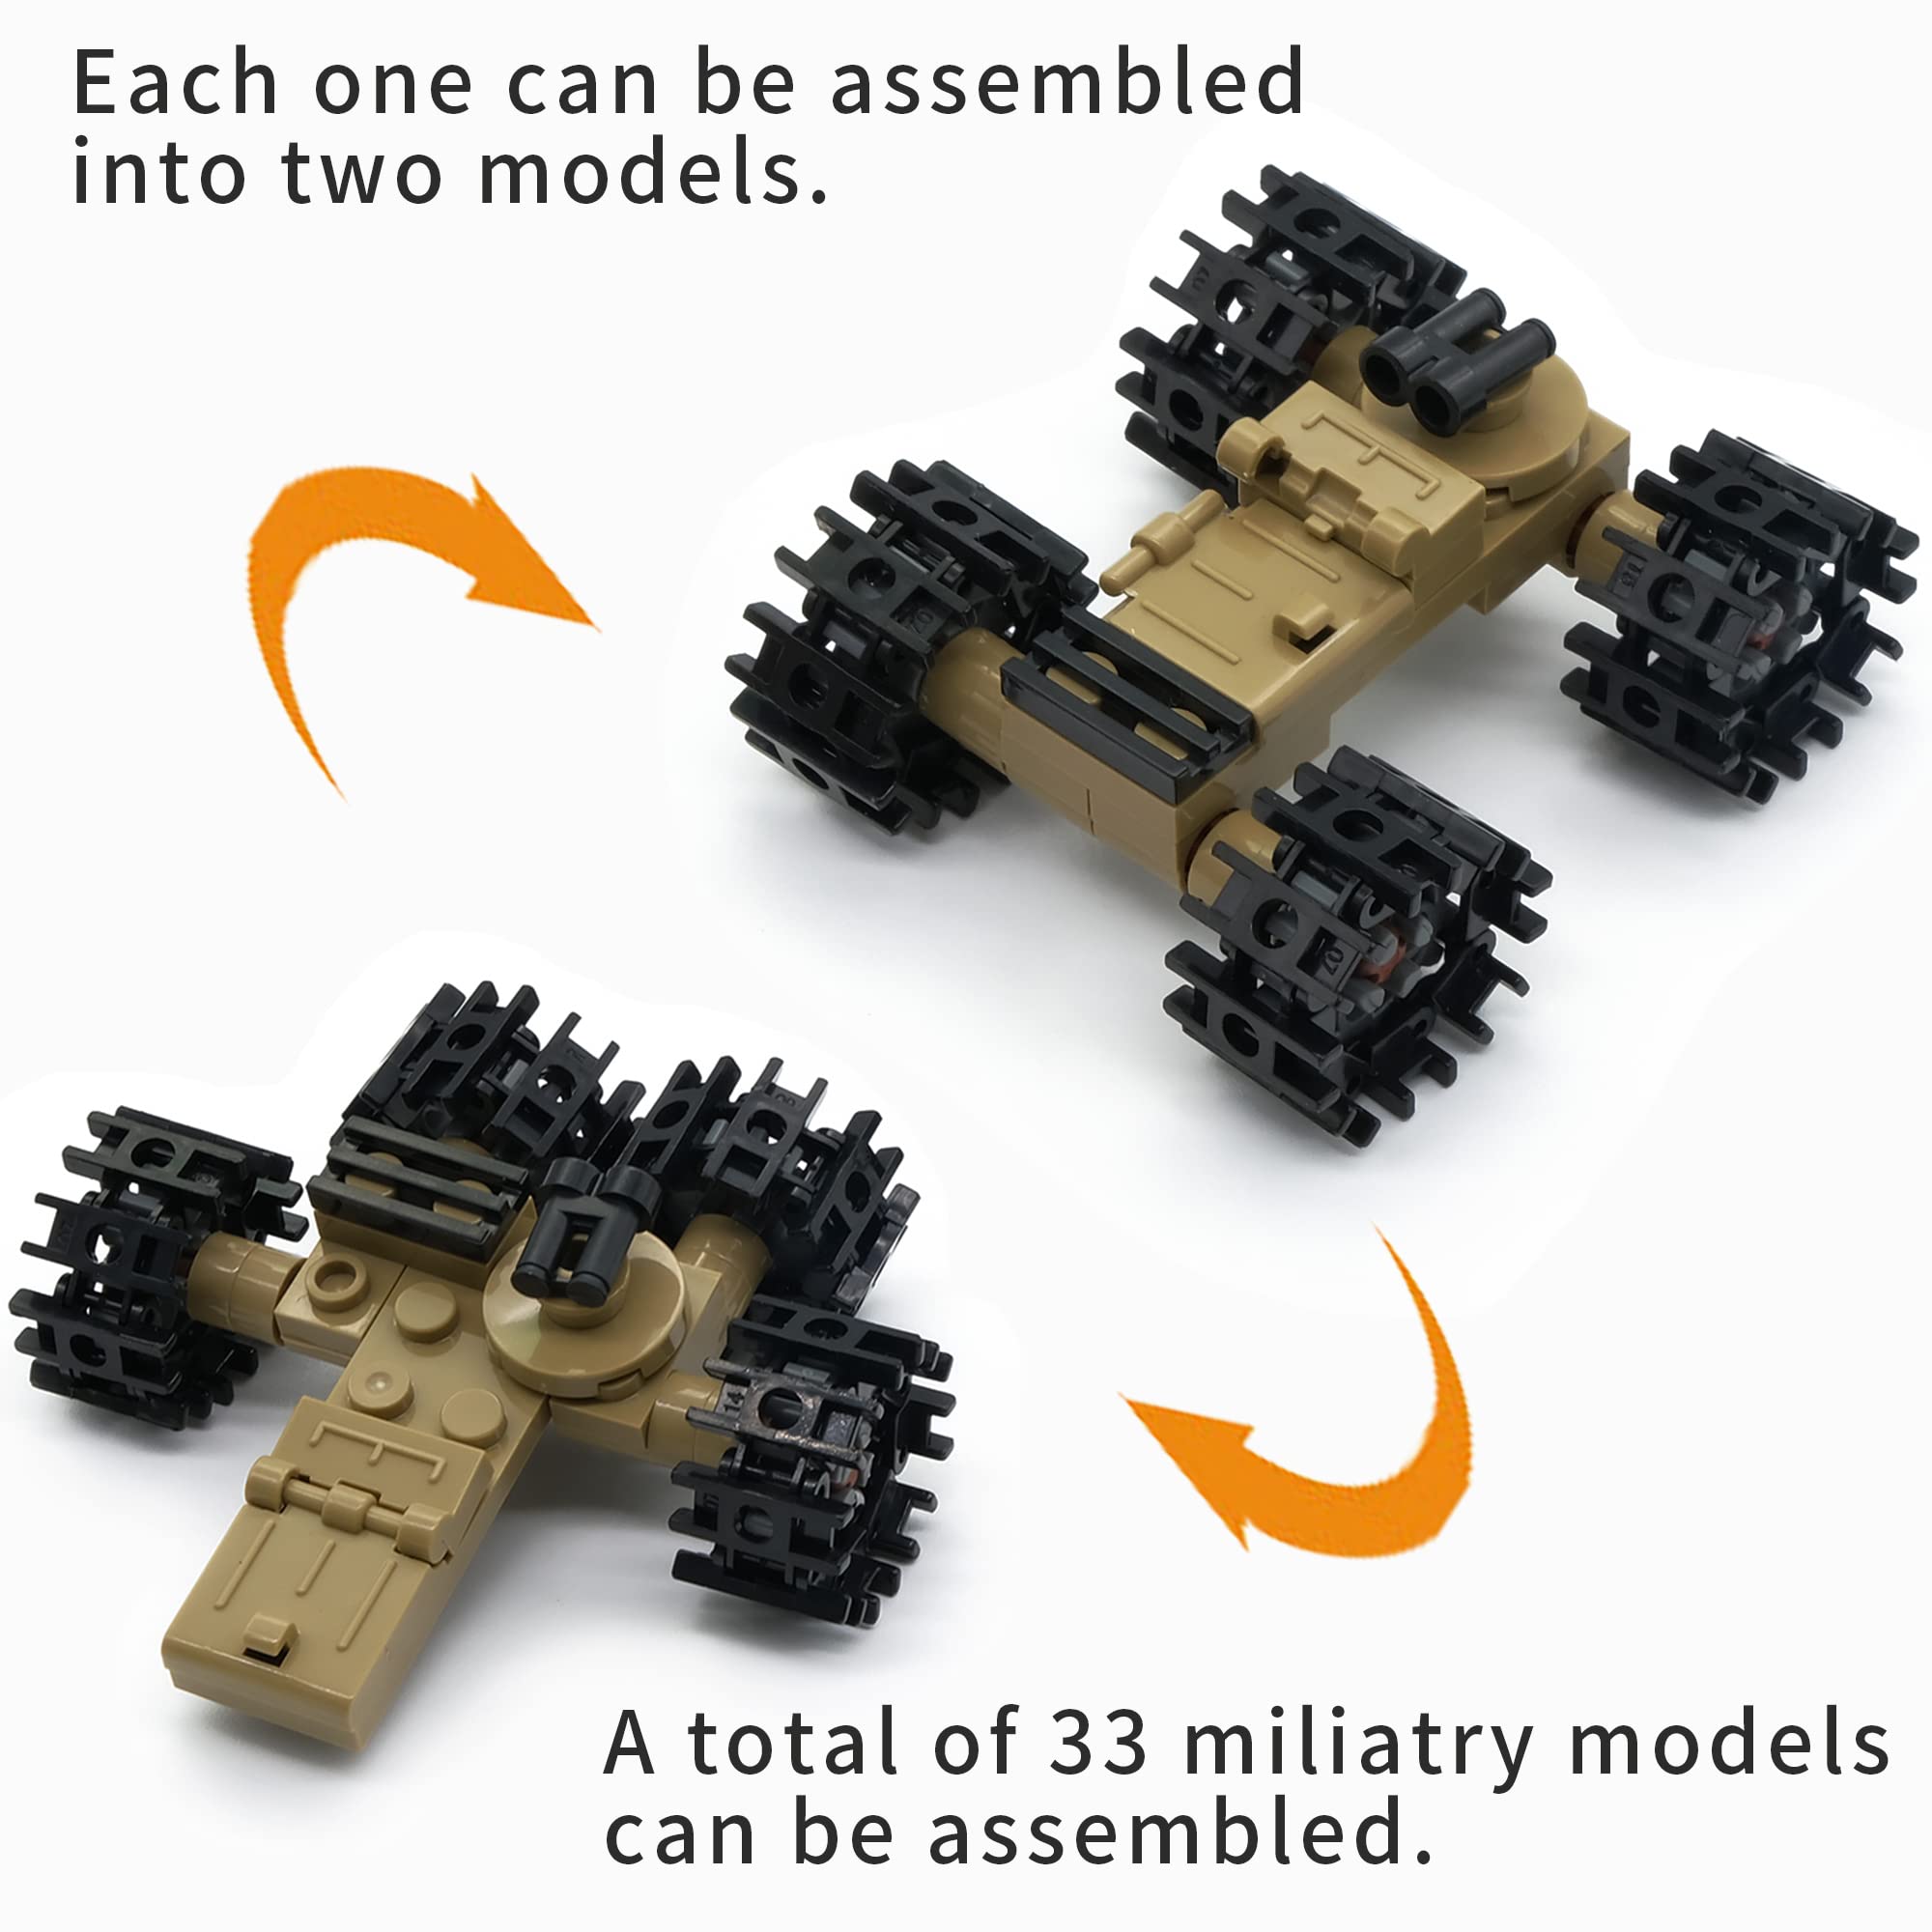 Army Tank Building Blocks Set with Toy Soldiers, Create a Armored Tank or 16 Small Military Models, Creative Army Men Toys Gifts for Boys Kids Age 6 7 8 9 Year Old (517Pcs)